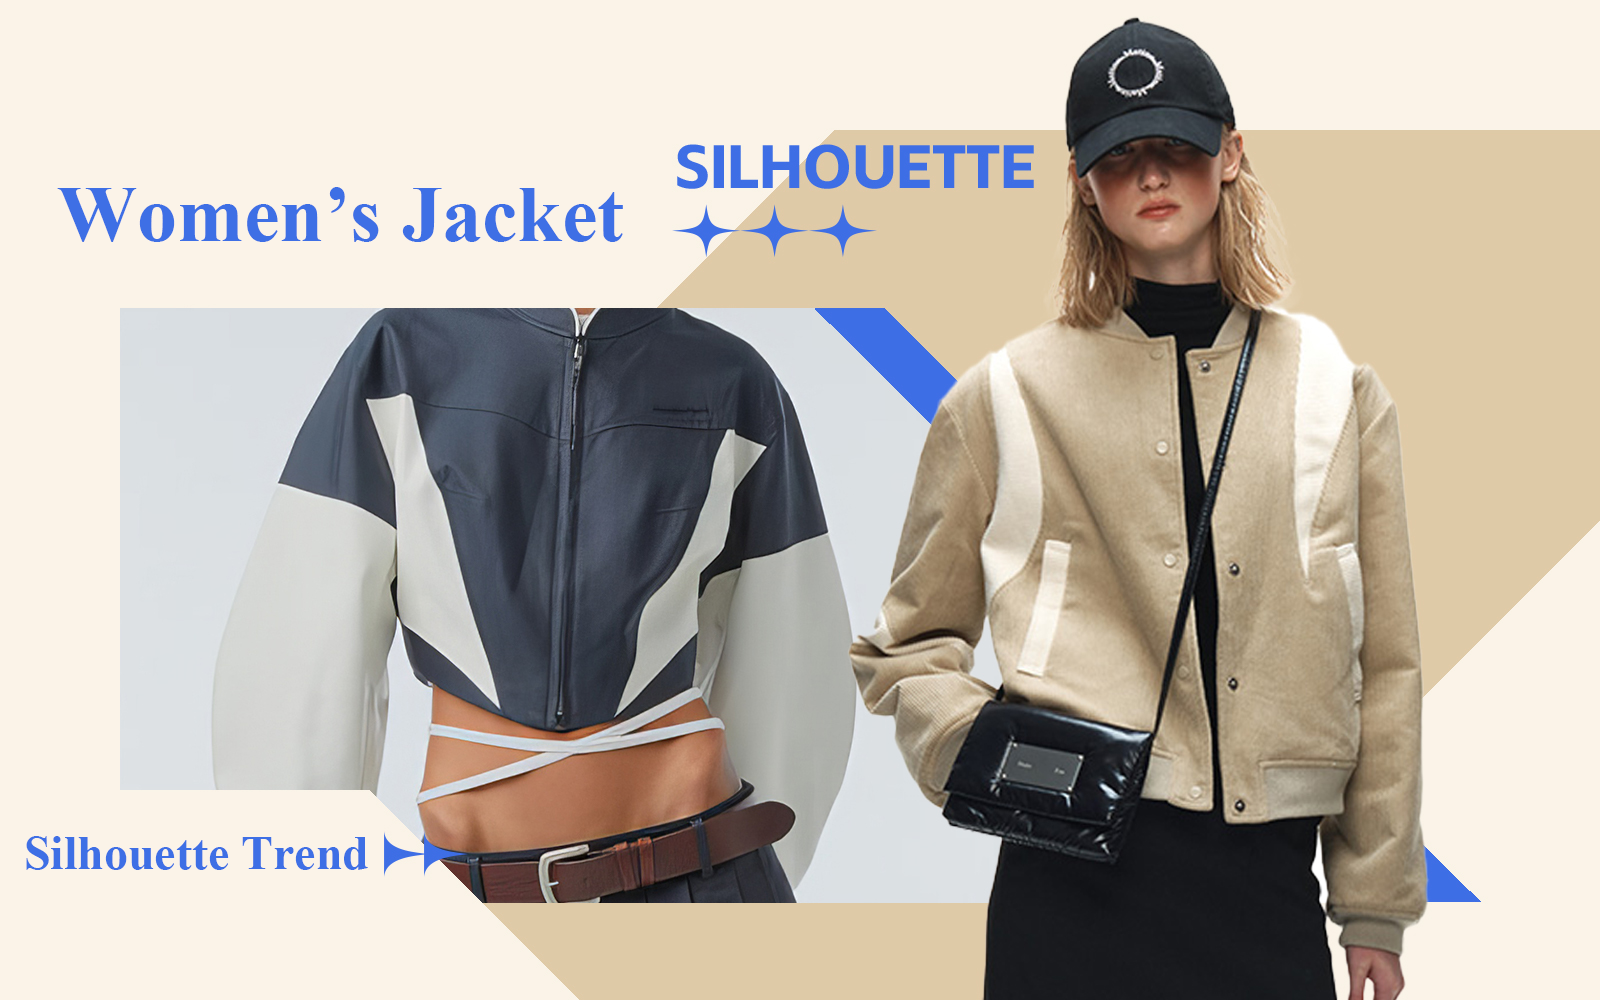 Korean Casual -- The Silhouette Trend for Women's Jacket